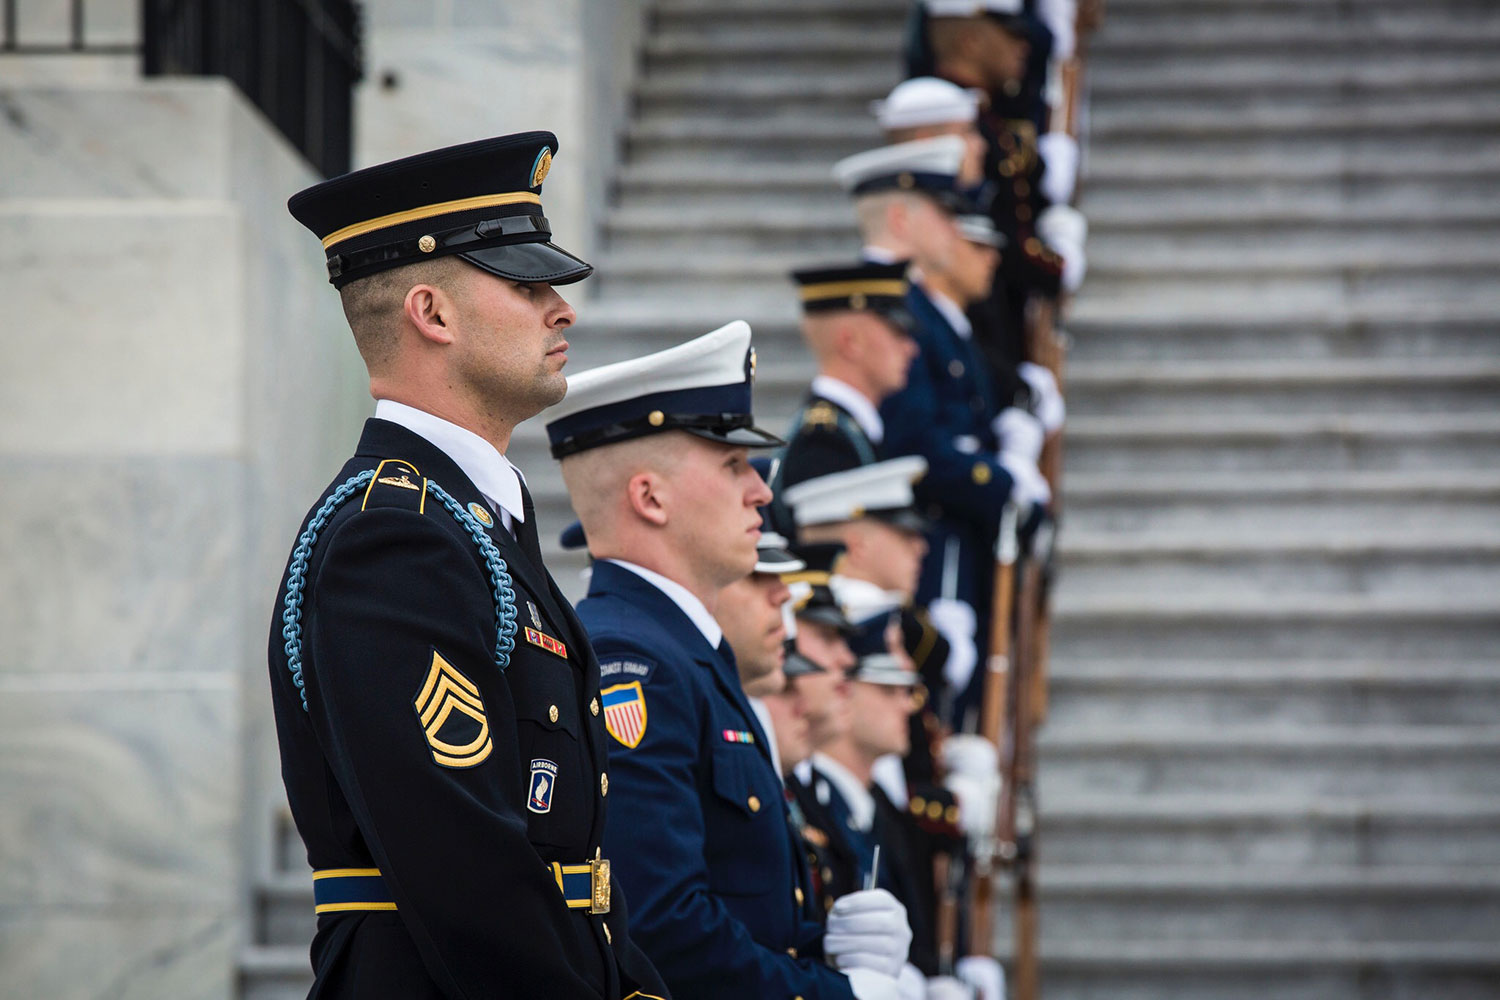 Sgt. 1st Class Christopher G. Taffoya, platoon sergeant for 3rd Platoon Honor Guard Company, stands at attention during the 58th Presidential Inauguration in Washington D.C., Jan. 20, 2017. More than 5,000 military members from across all branches of the armed forces of the United States, including Reserve and National Guard components, provided ceremonial support and Defense Support of Civil Authorities during the inaugural period. (Photo by U.S. Army Spc. William Lockwood)